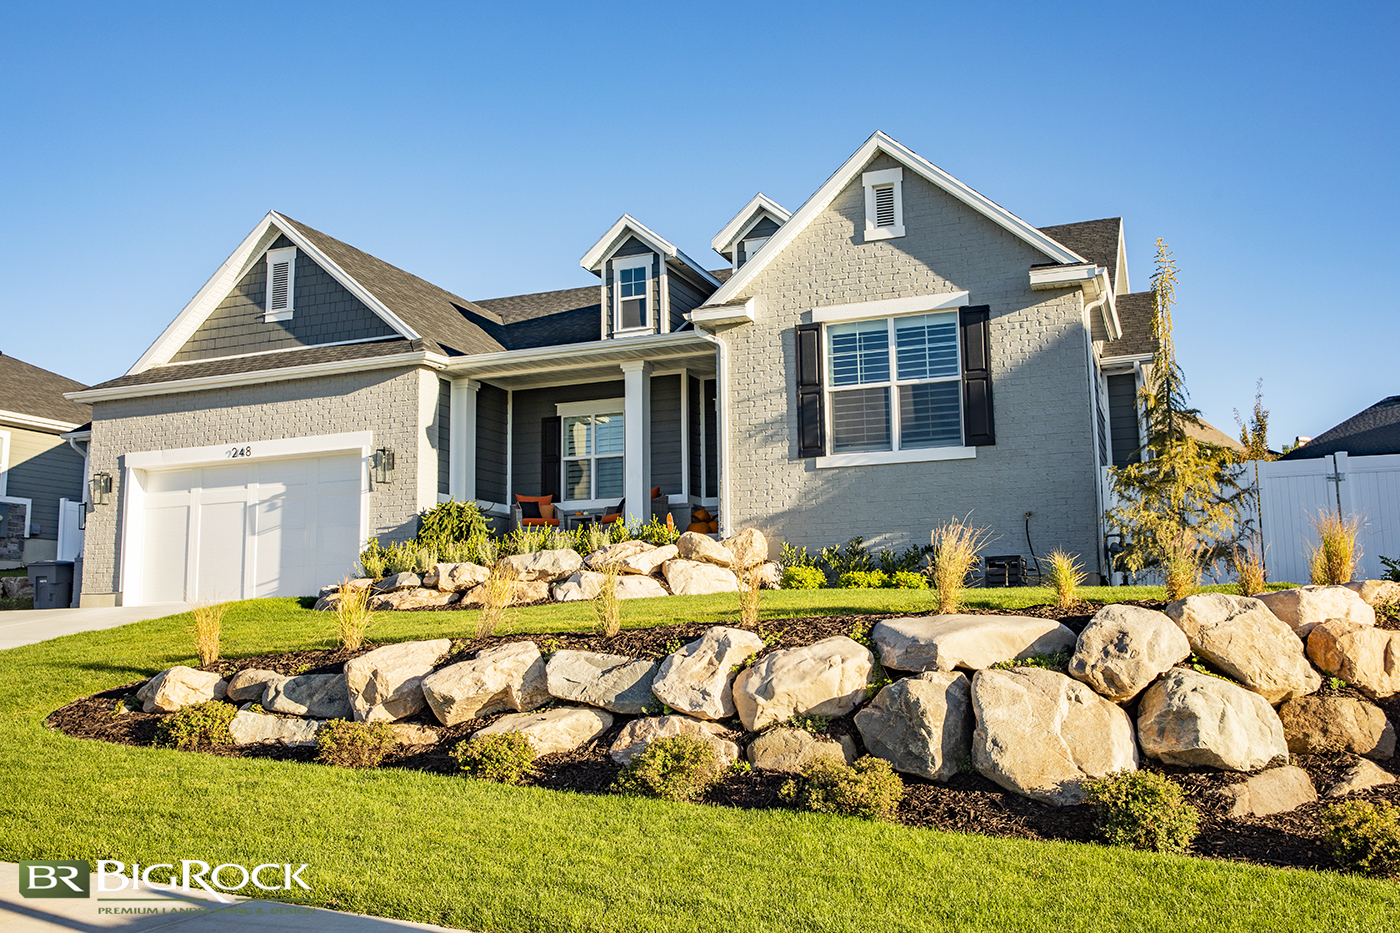 Create design interest throughout your home landscape with a natural stone rock wall design.